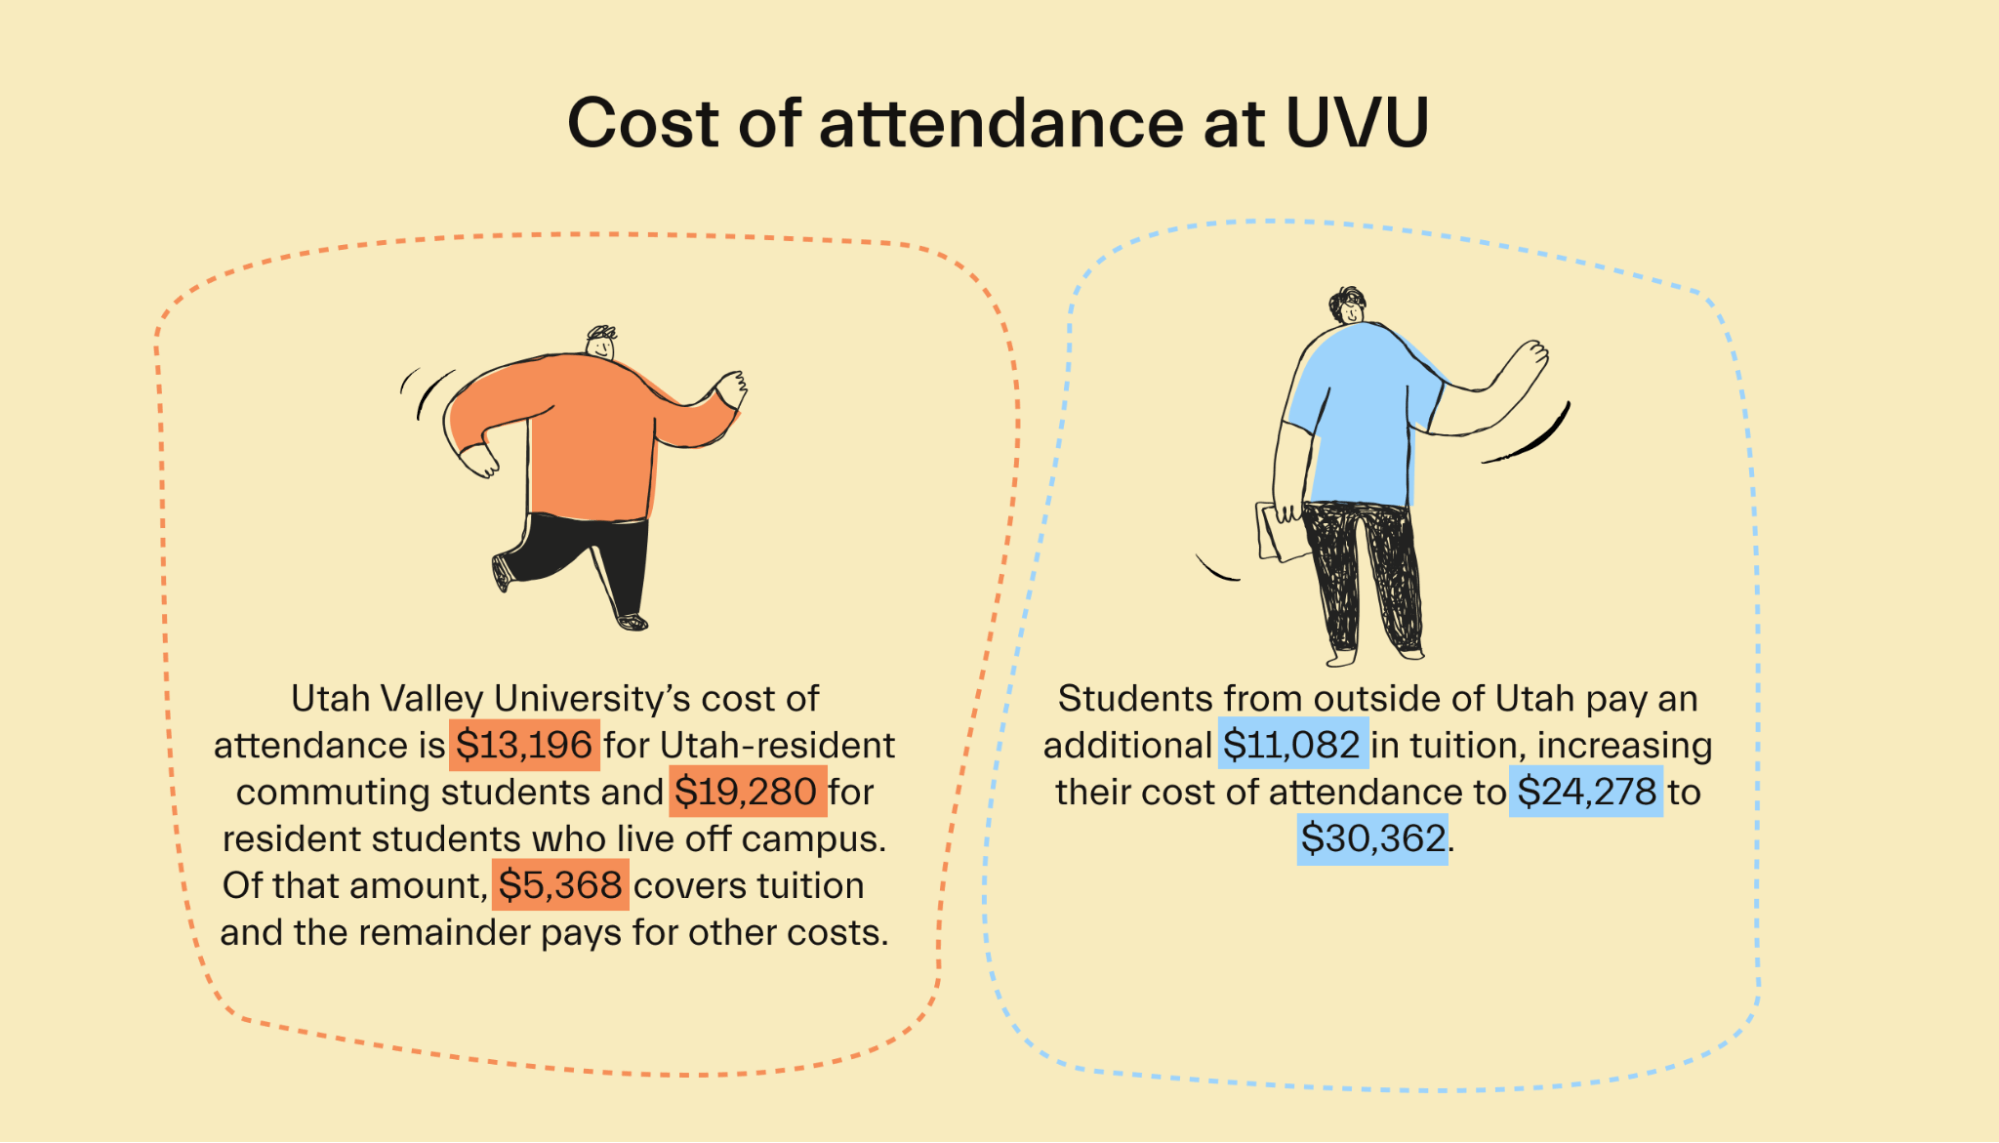 Cost of attendance at UVU